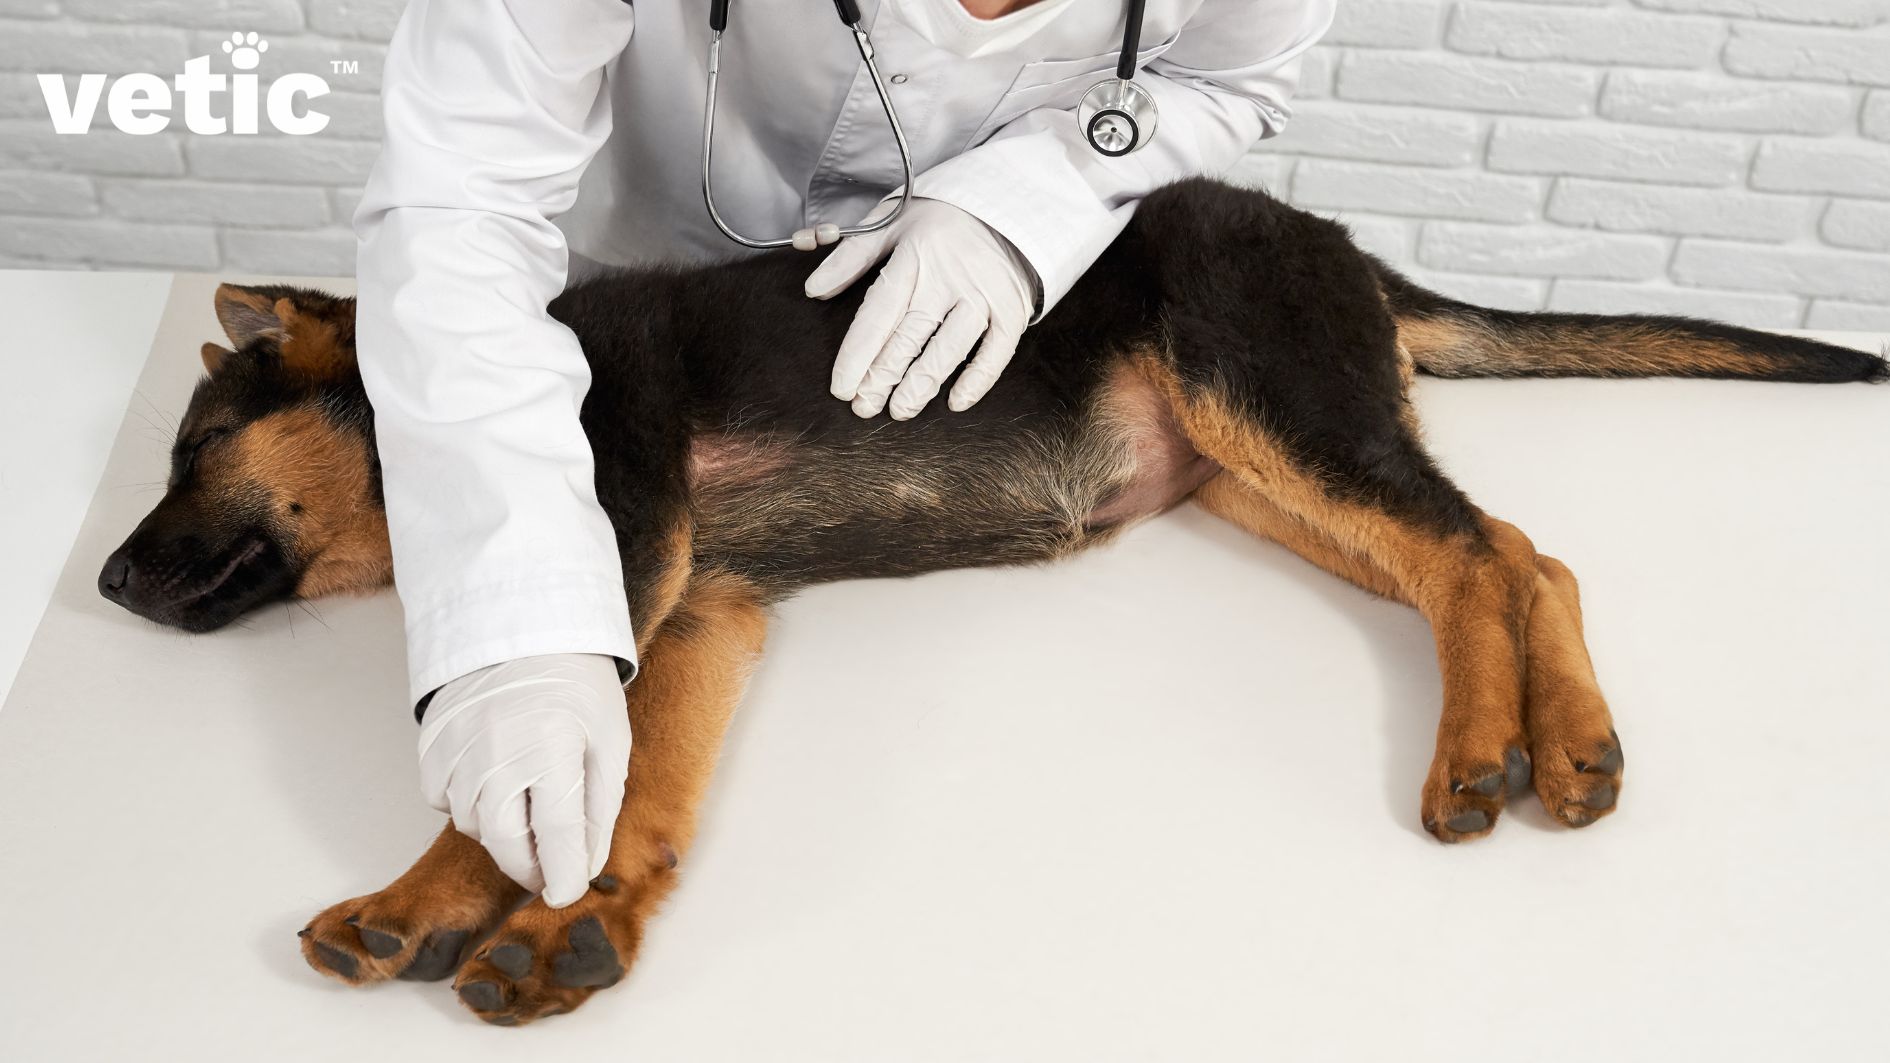 Get your large breed pup checked by a veterinarian frequently to ensure he doesn't have any signs of hip dysplasia in dogs. In the image, we can see a vet checking the joints of a German Shepherd puppy.